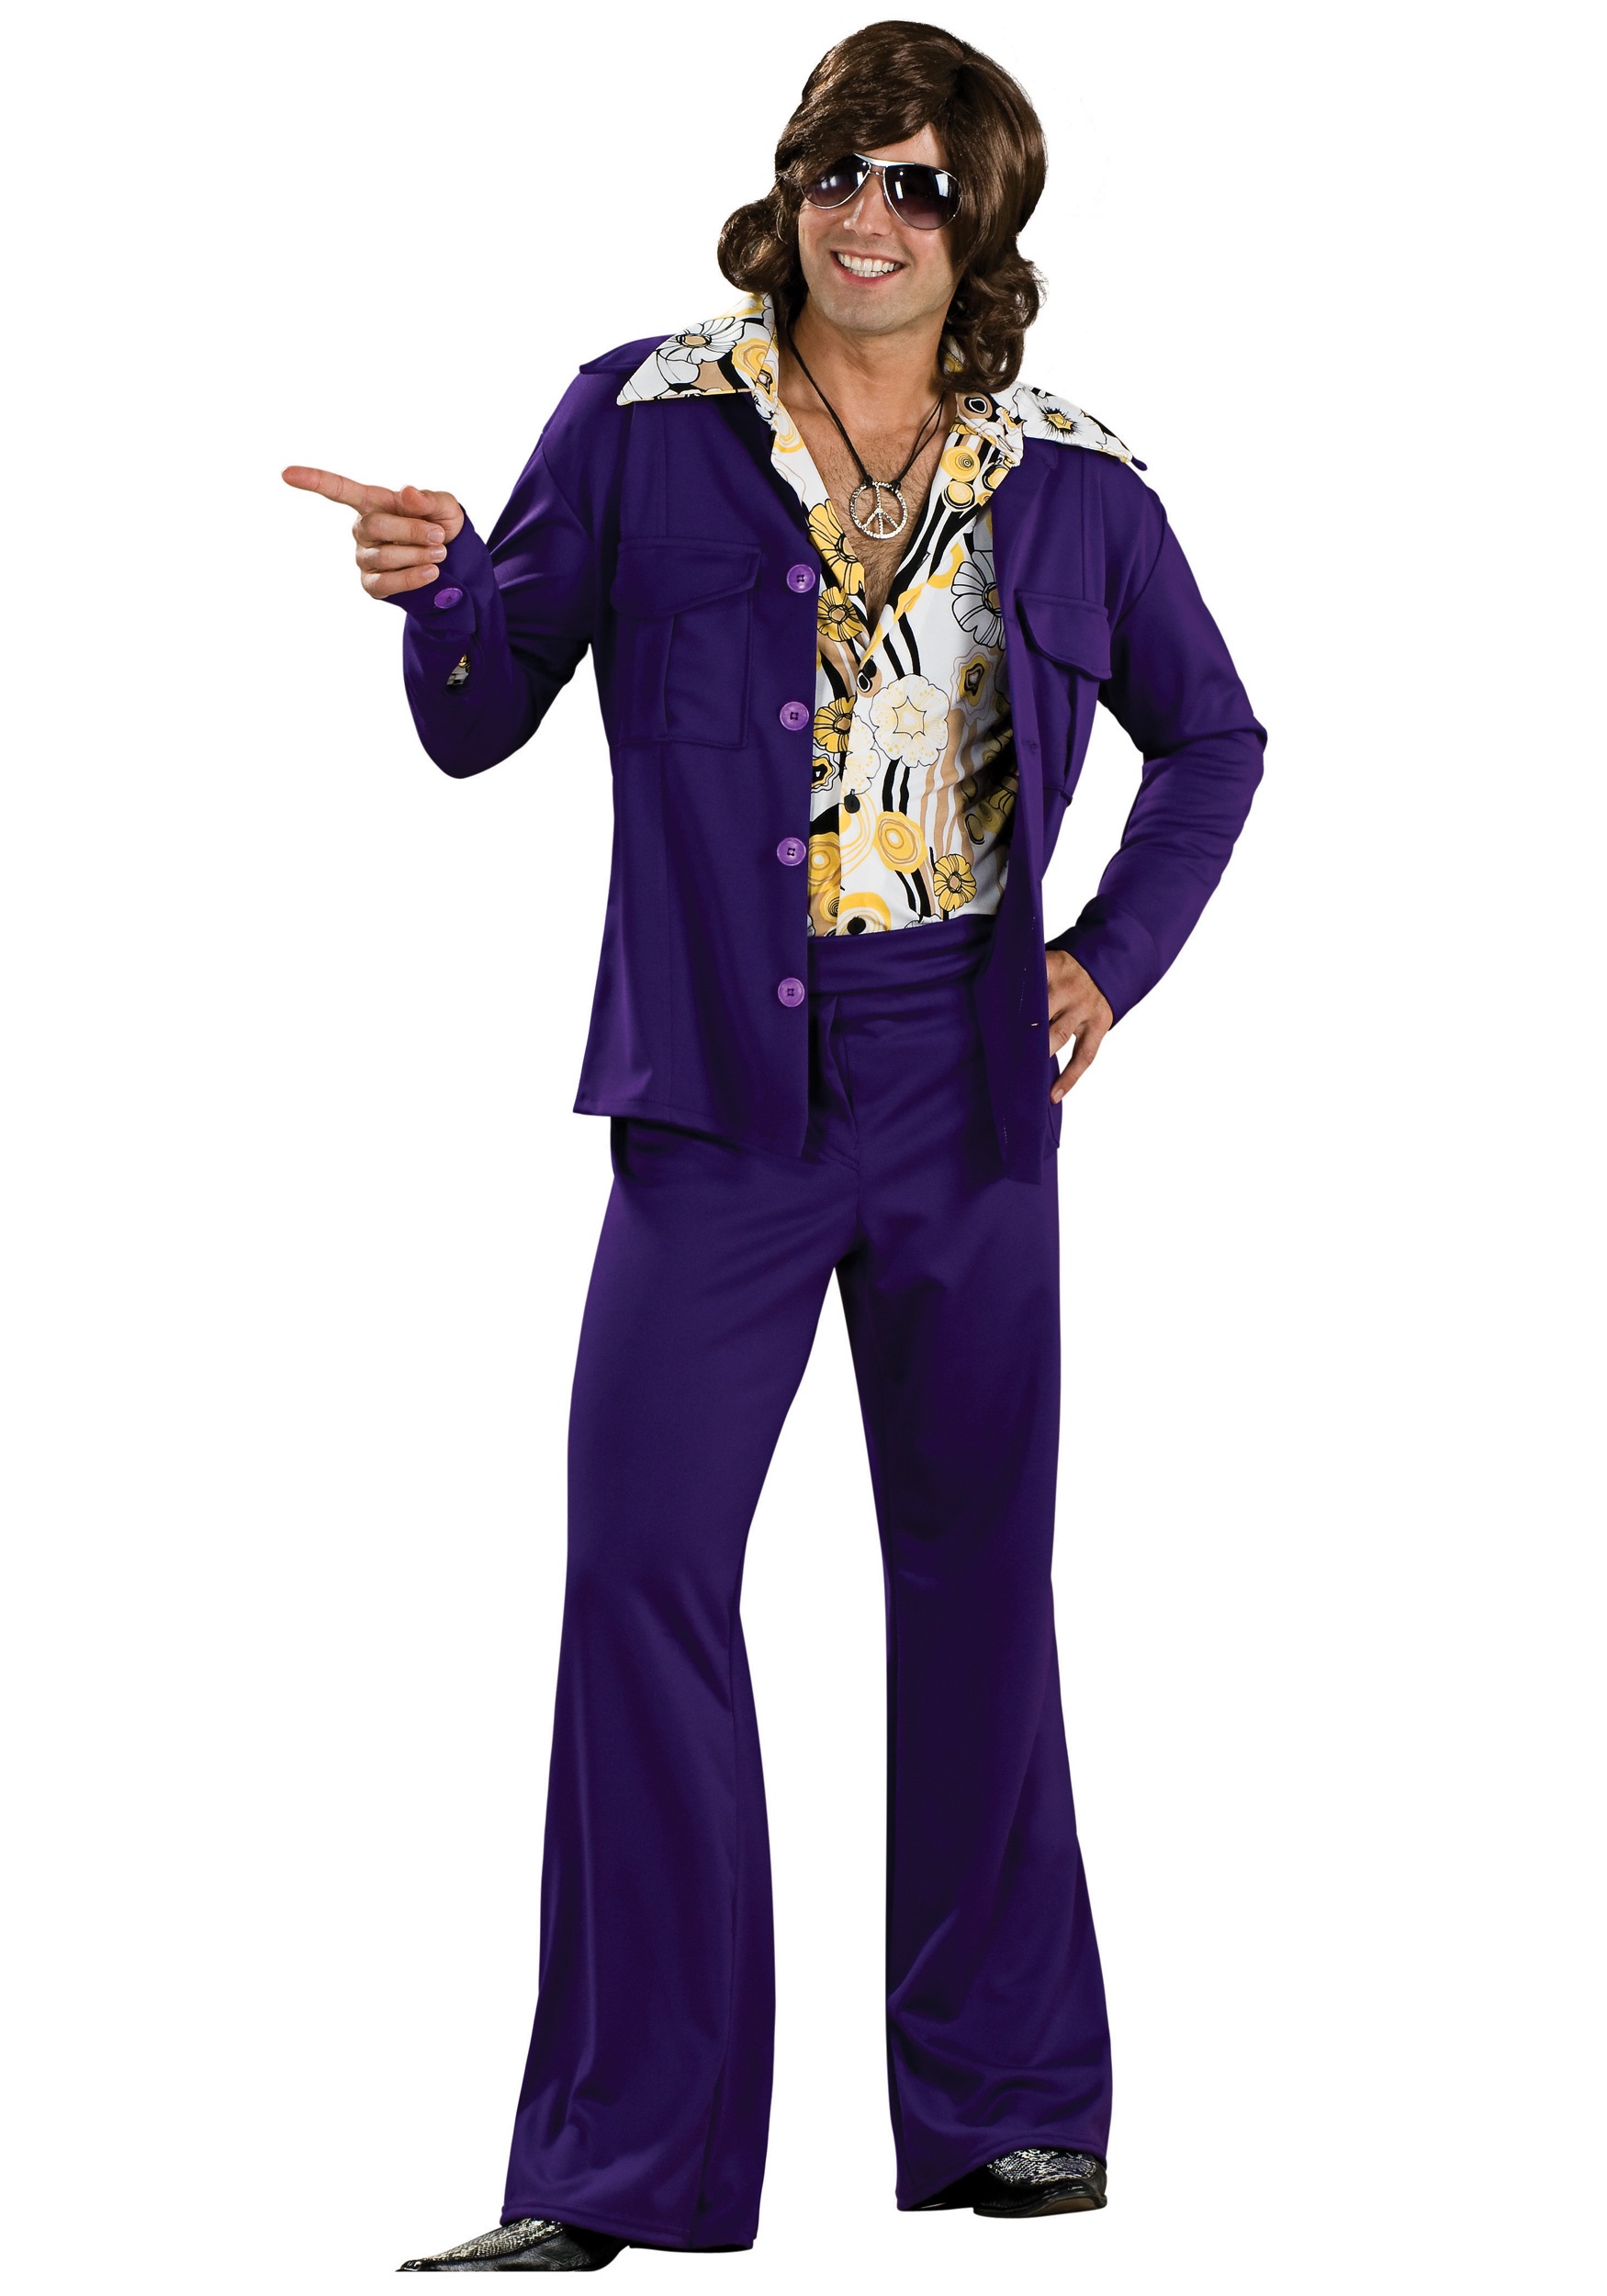 Leisure Suit- The 70's was the decade of the leisure suit, it consisted of  a shirt-like jacket and had matchi… | 70s fashion men, Leisure suit,  Vintage mens fashion